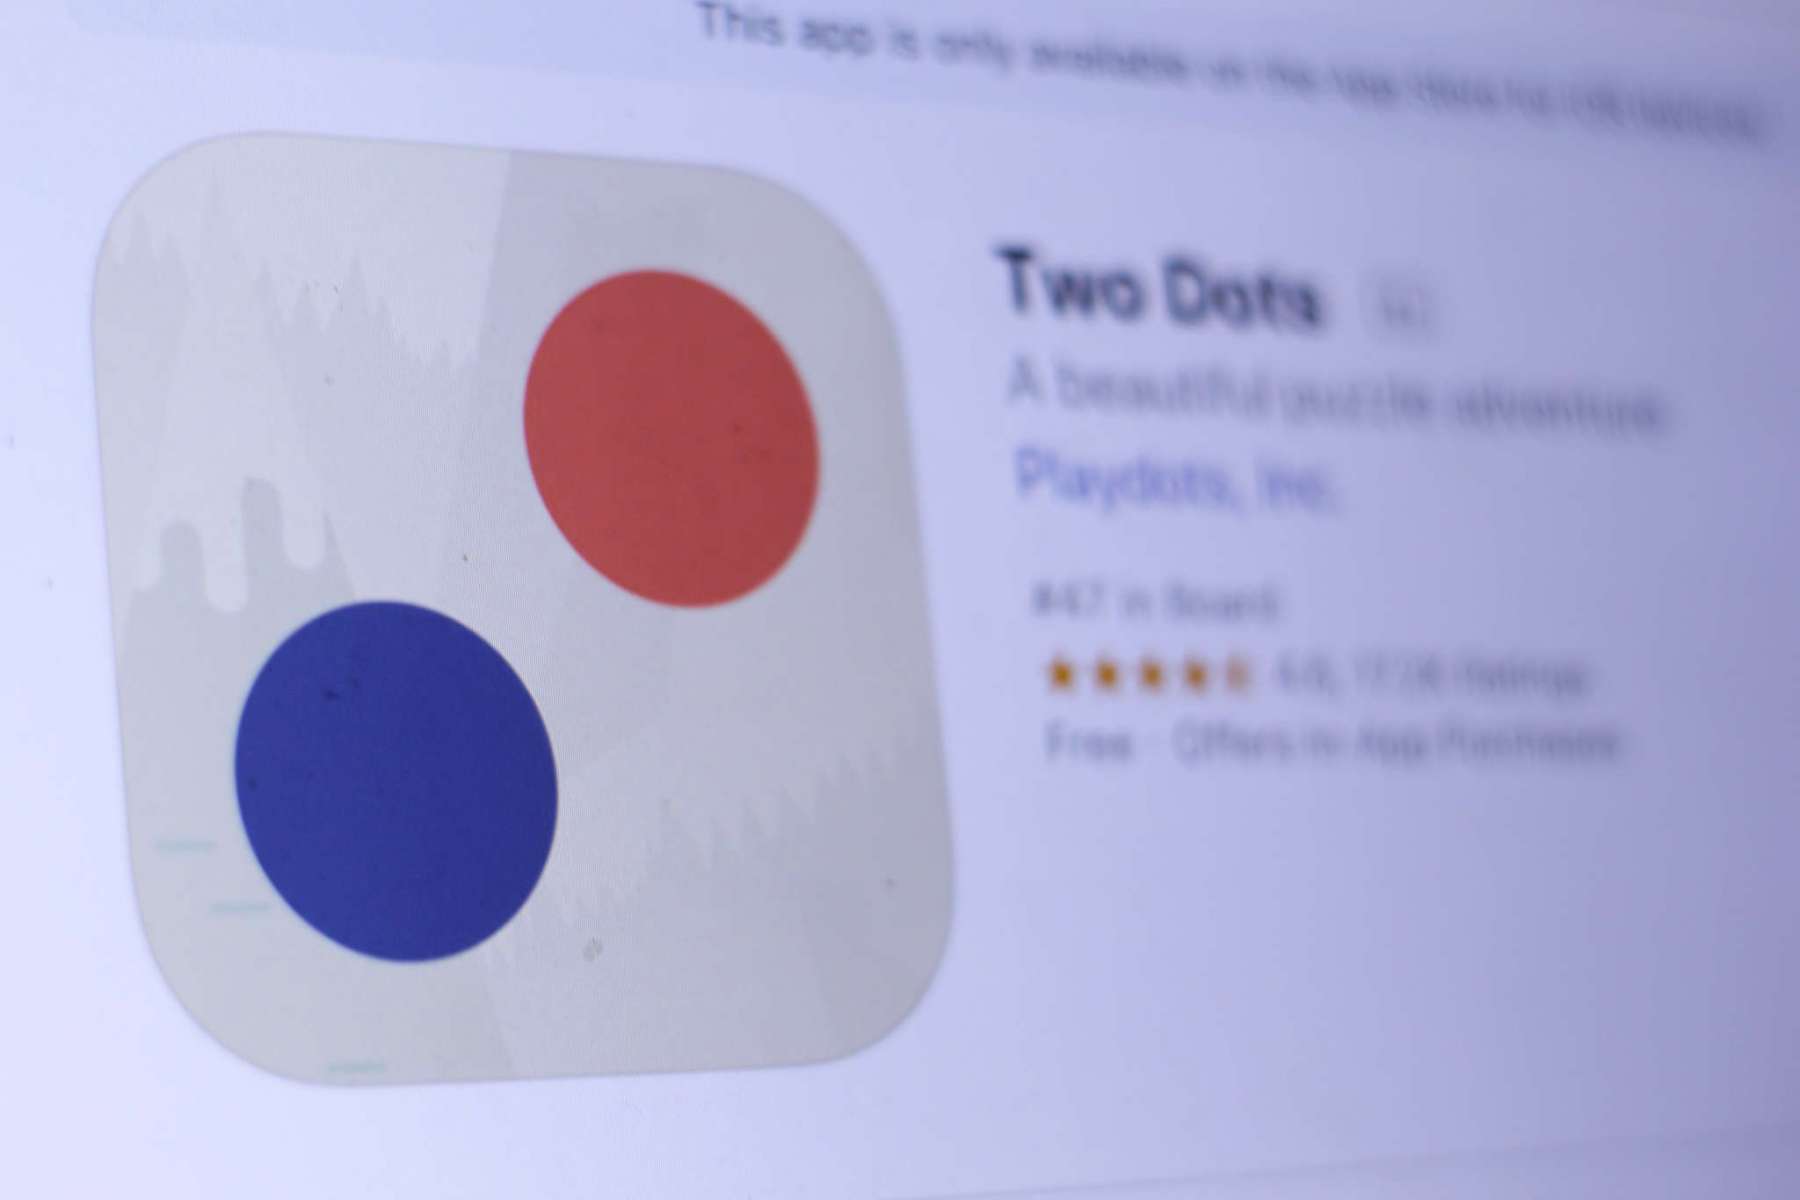 Google has hidden an addictive game on your iPhone: How to find it